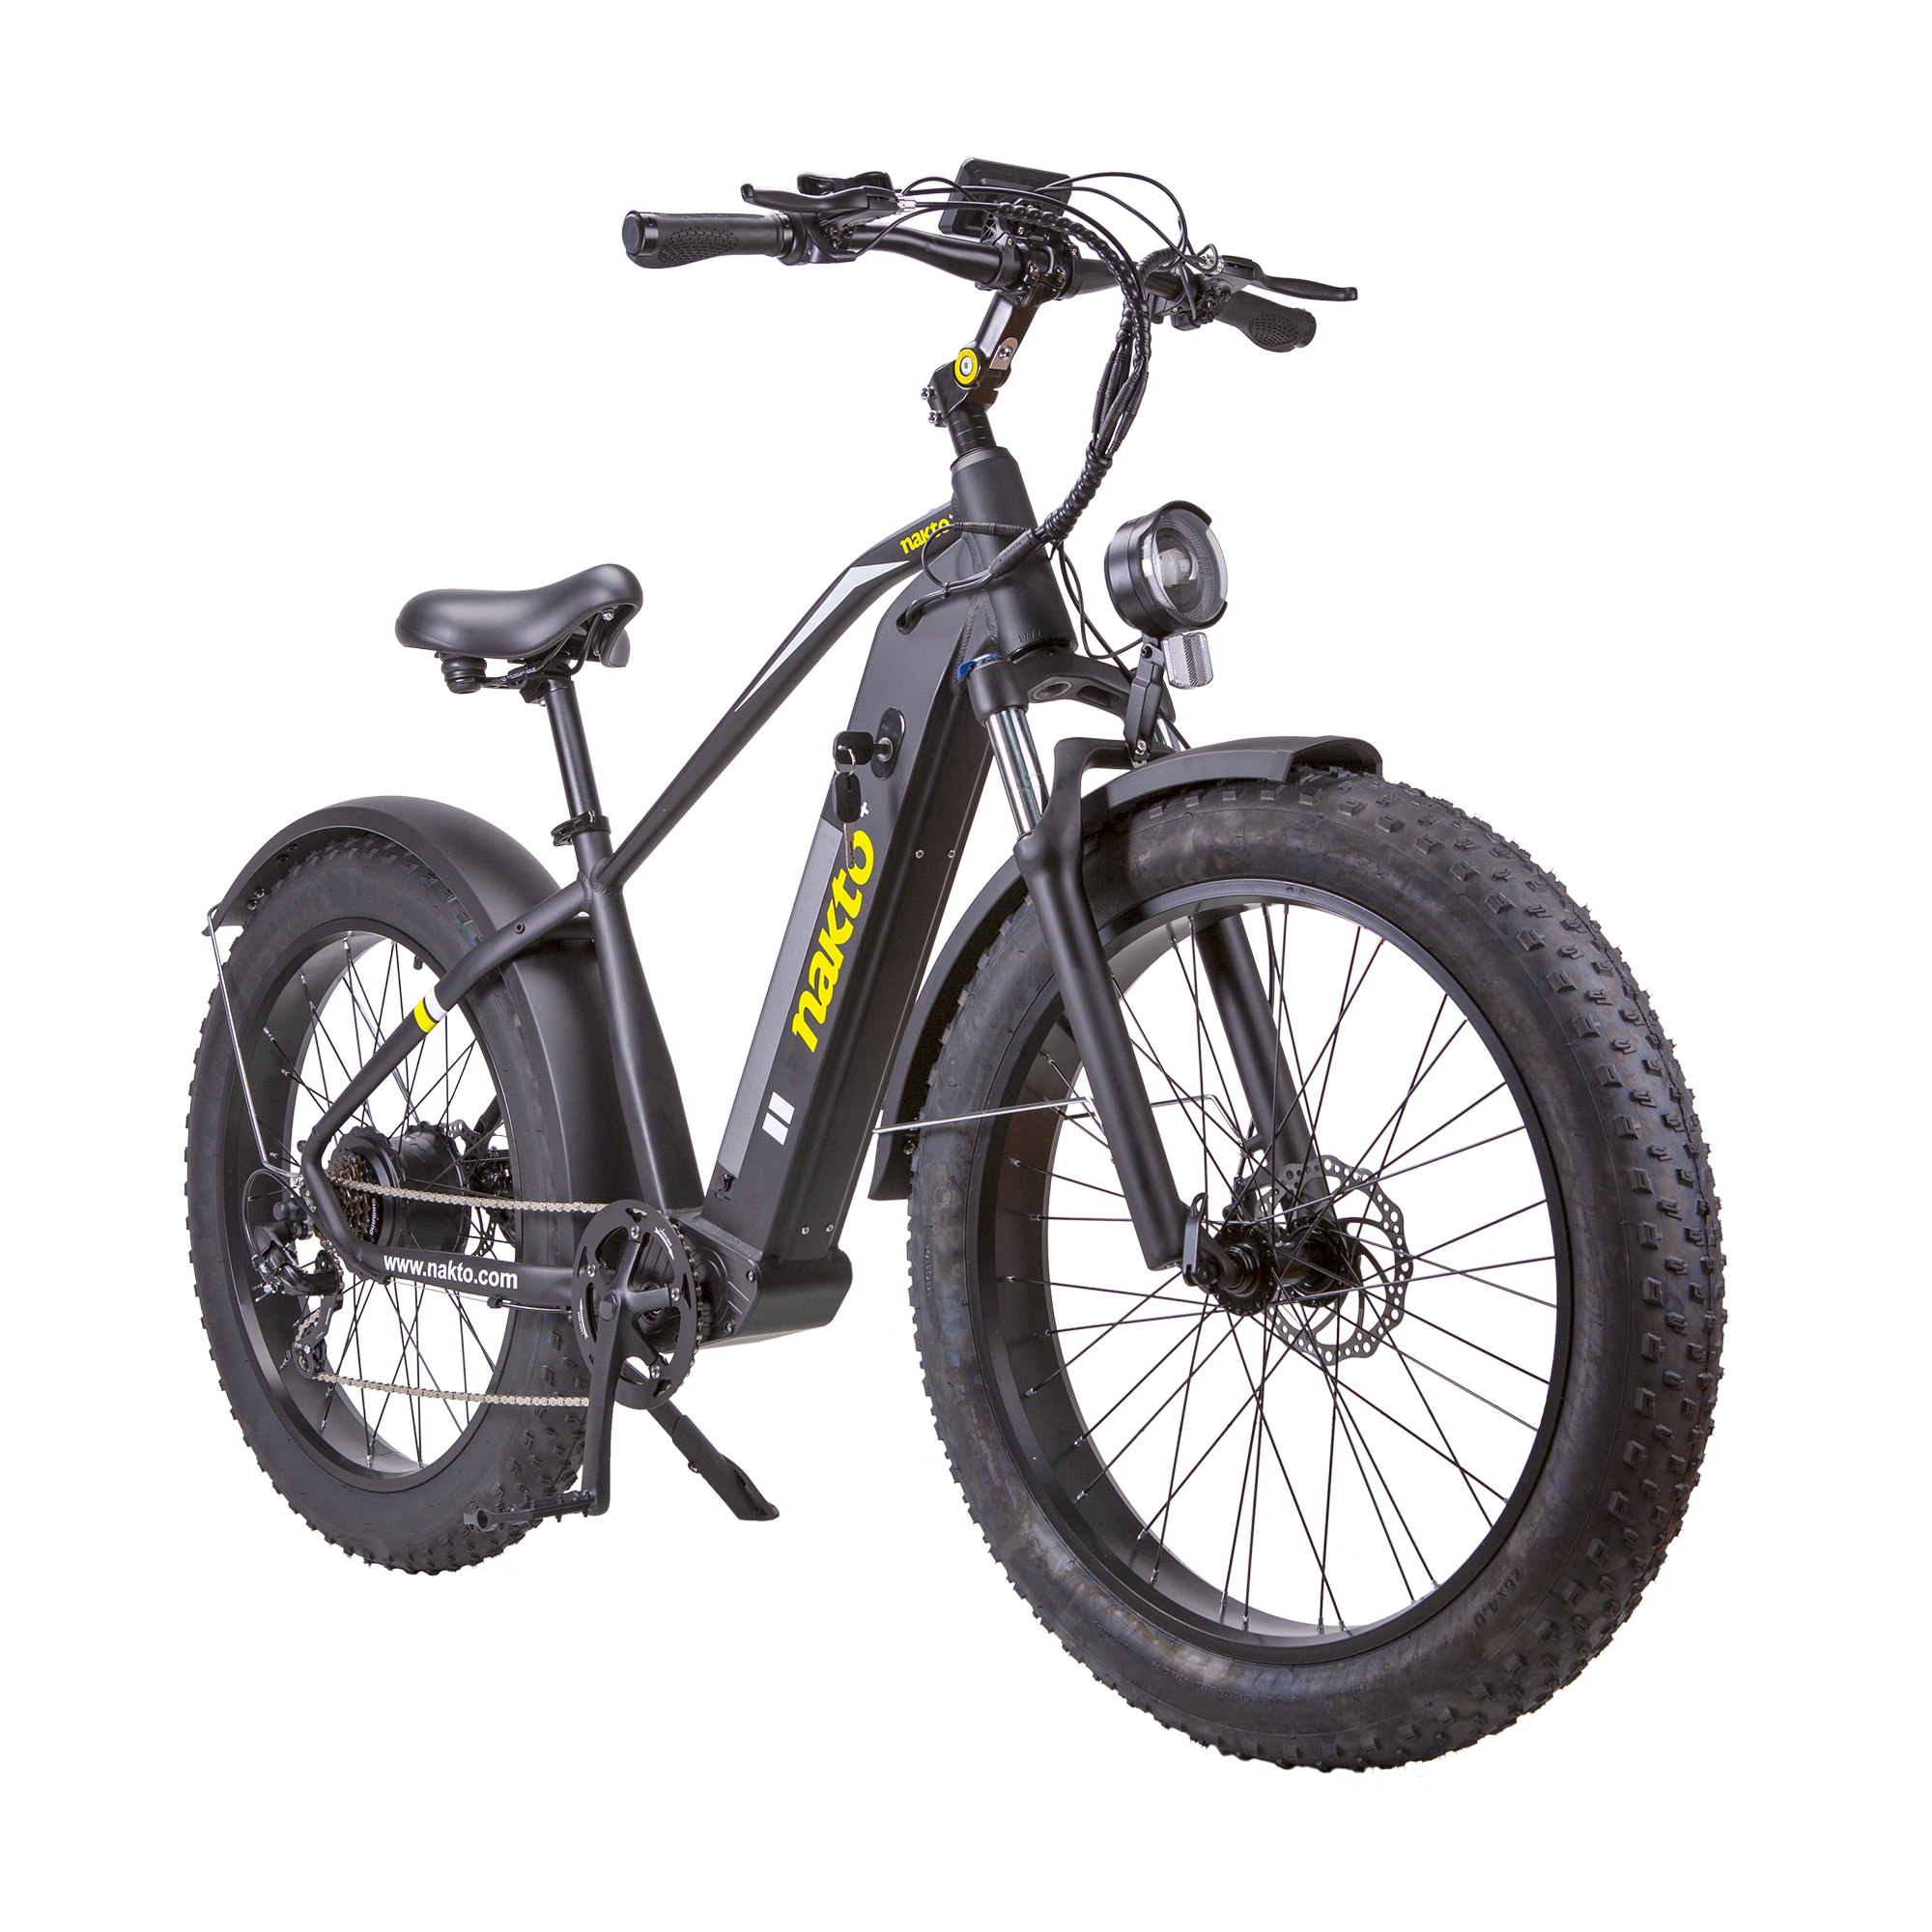 NAKTO F6 Fat Tire Electric Bicycle 6 Speed 26" 750W Motor with Peak 1000W 28 MPH 60 Mile Range 48V Lithium Battery Black New